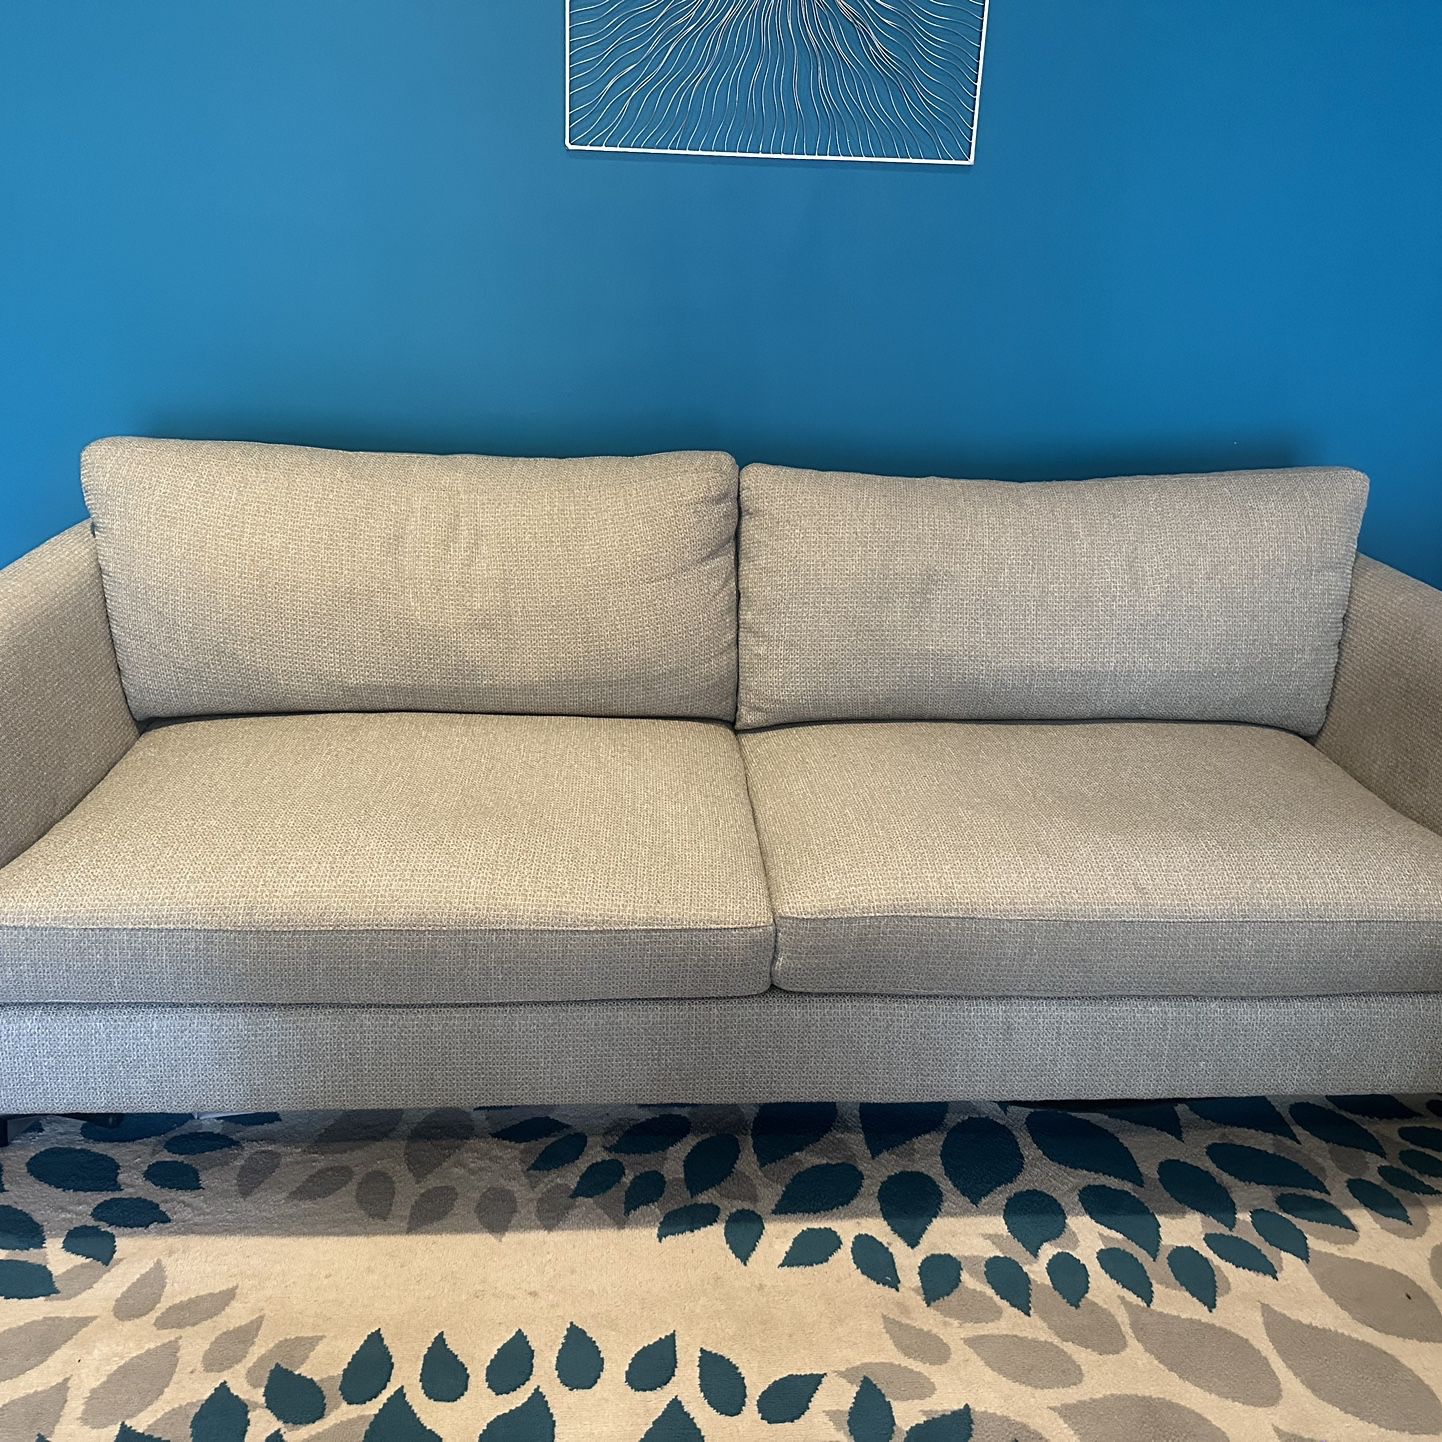 Crate & Barrel Tyson Couch